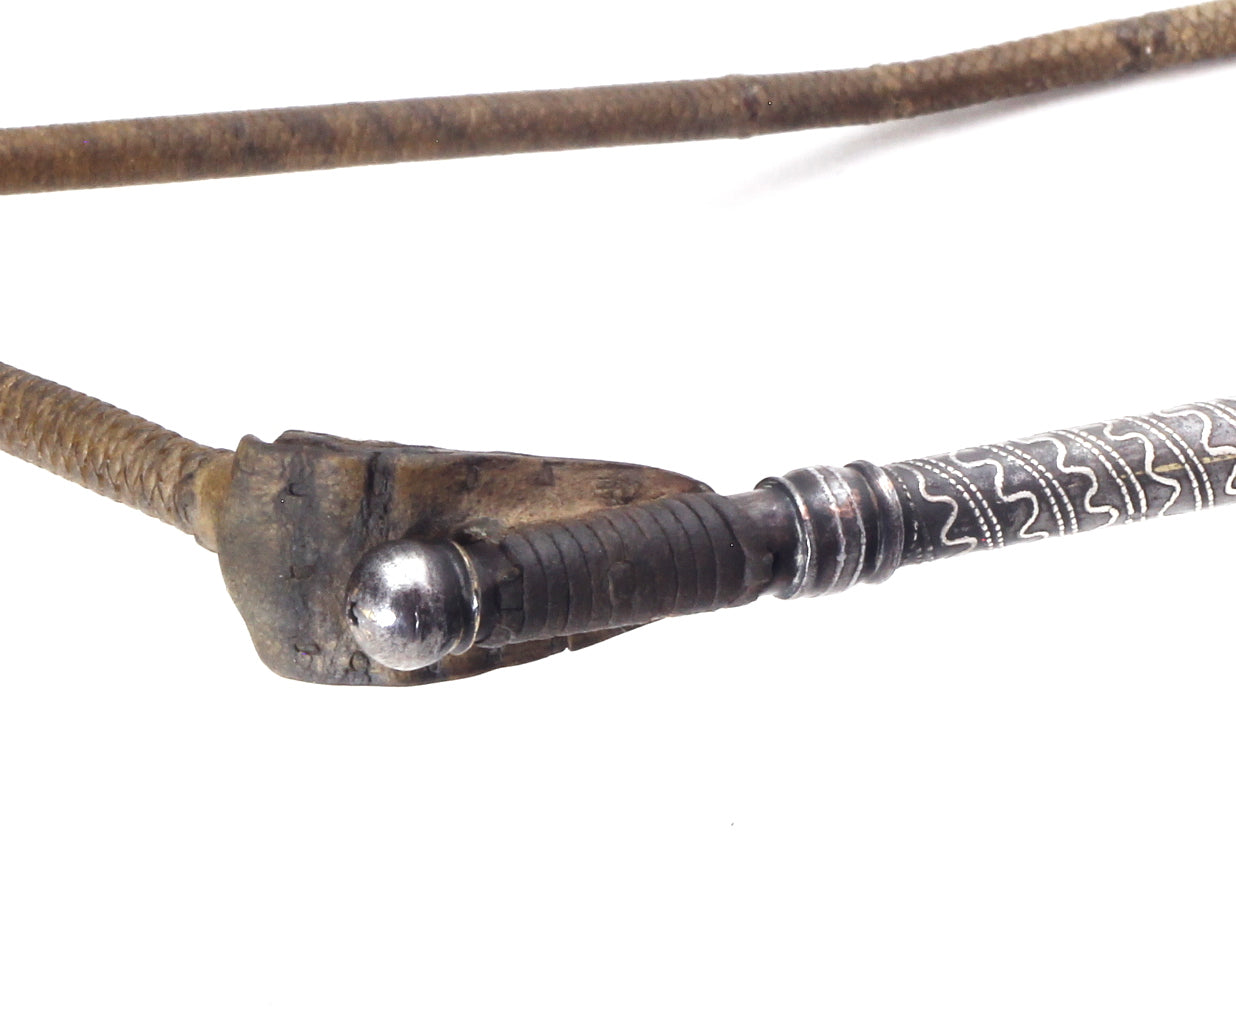 Silver Caucasian Riding Whip or Nagaika with Concealed Blade